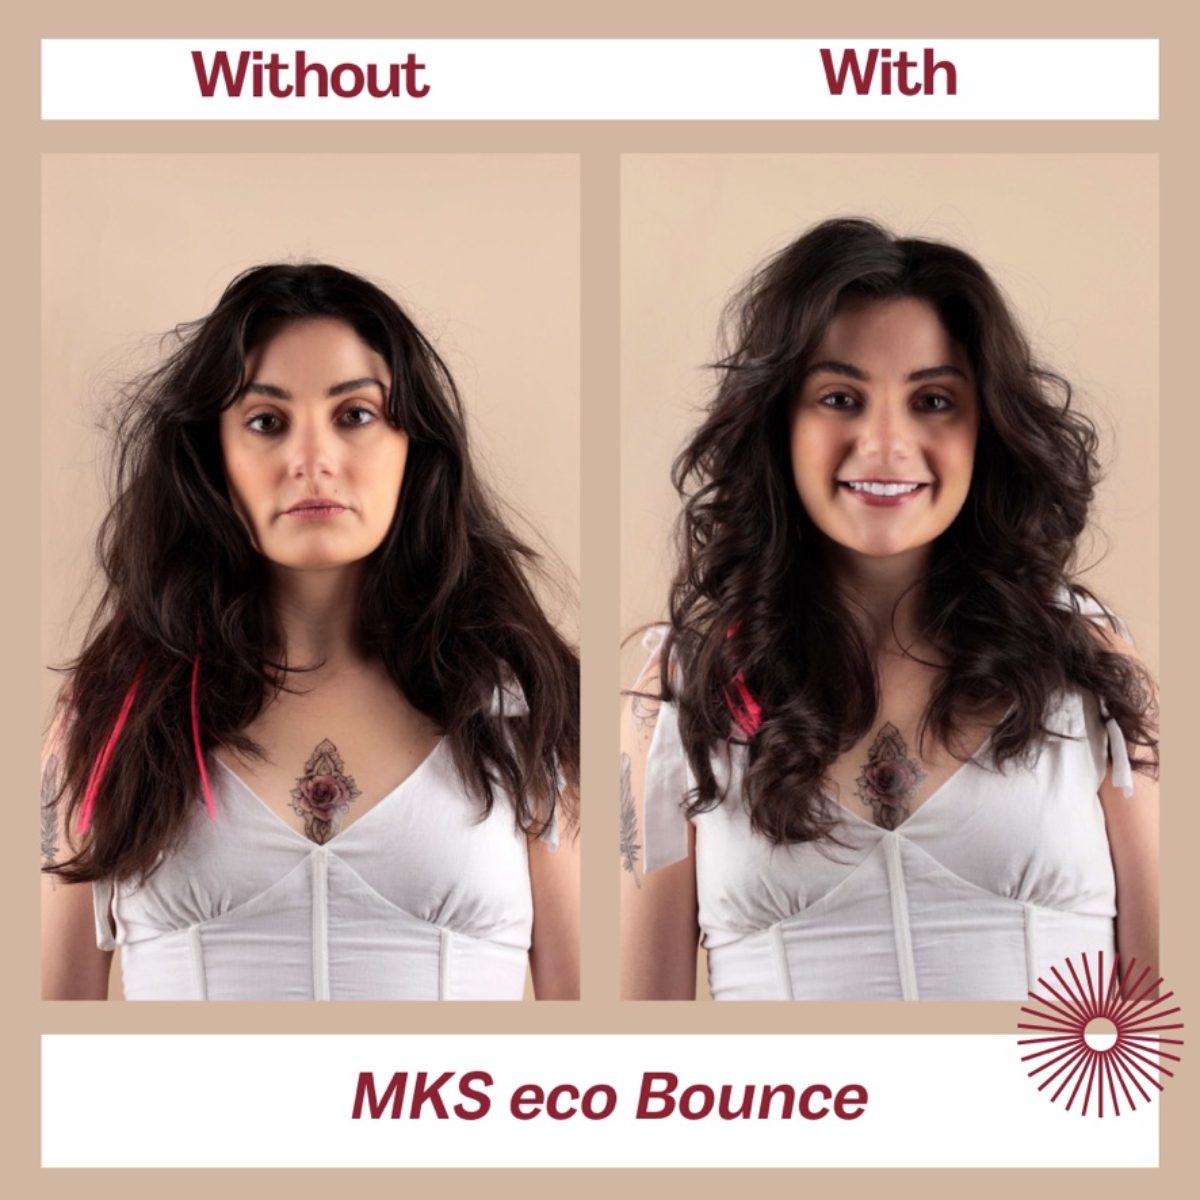 MKS eco Bounce Before and After